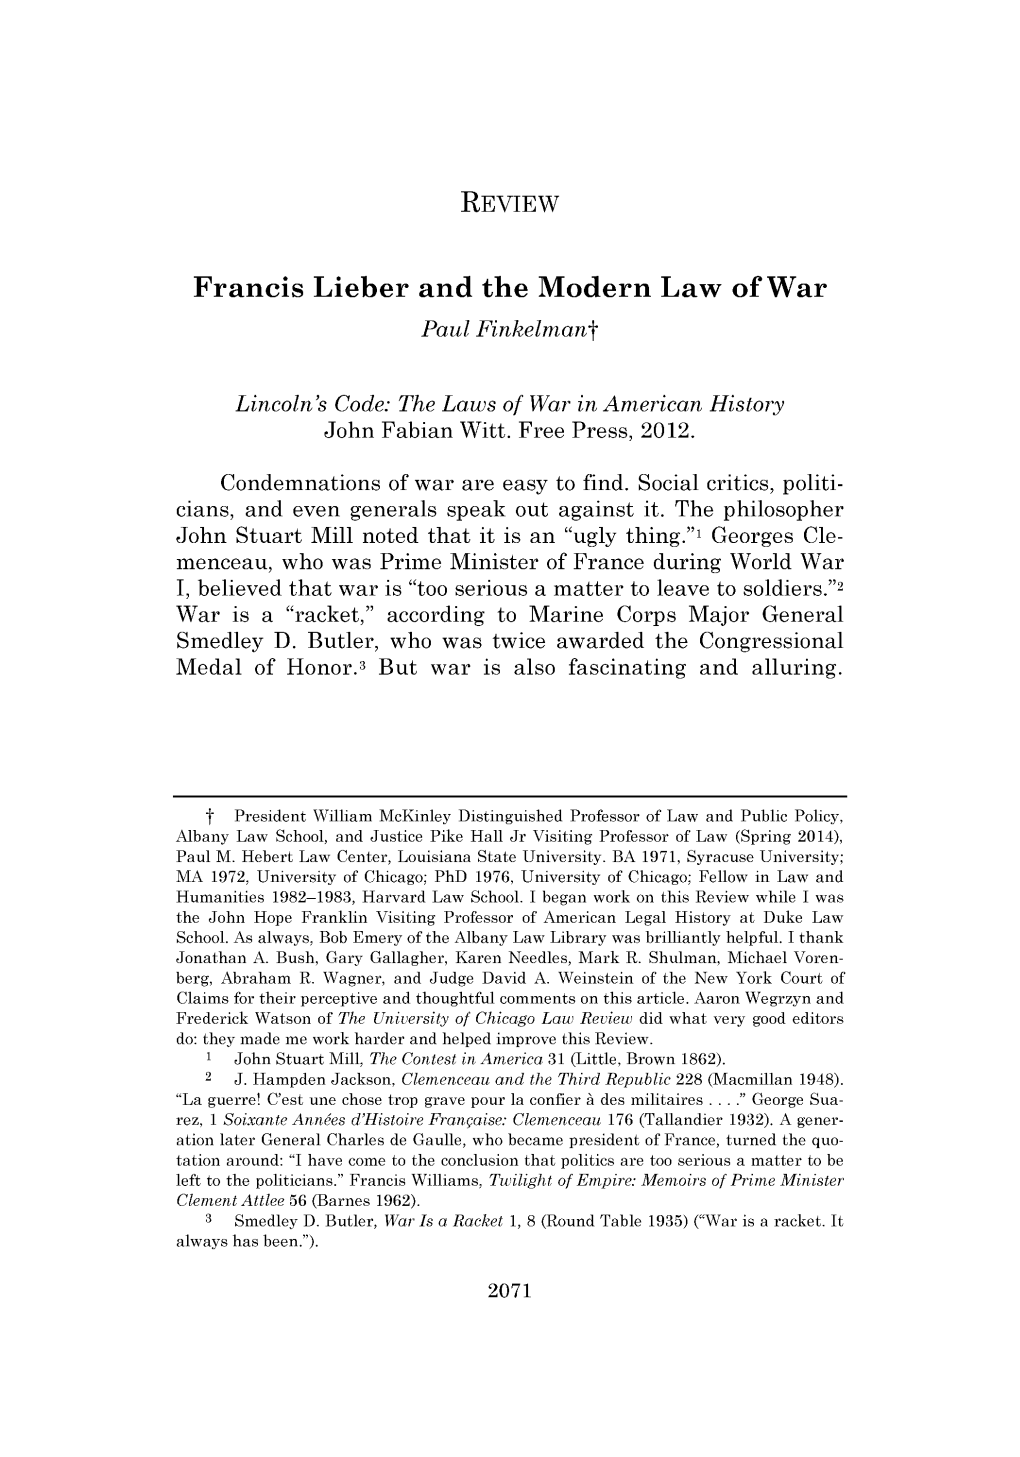 Francis Lieber and the Modern Law of War (Reviewing Lincoln's Code: The